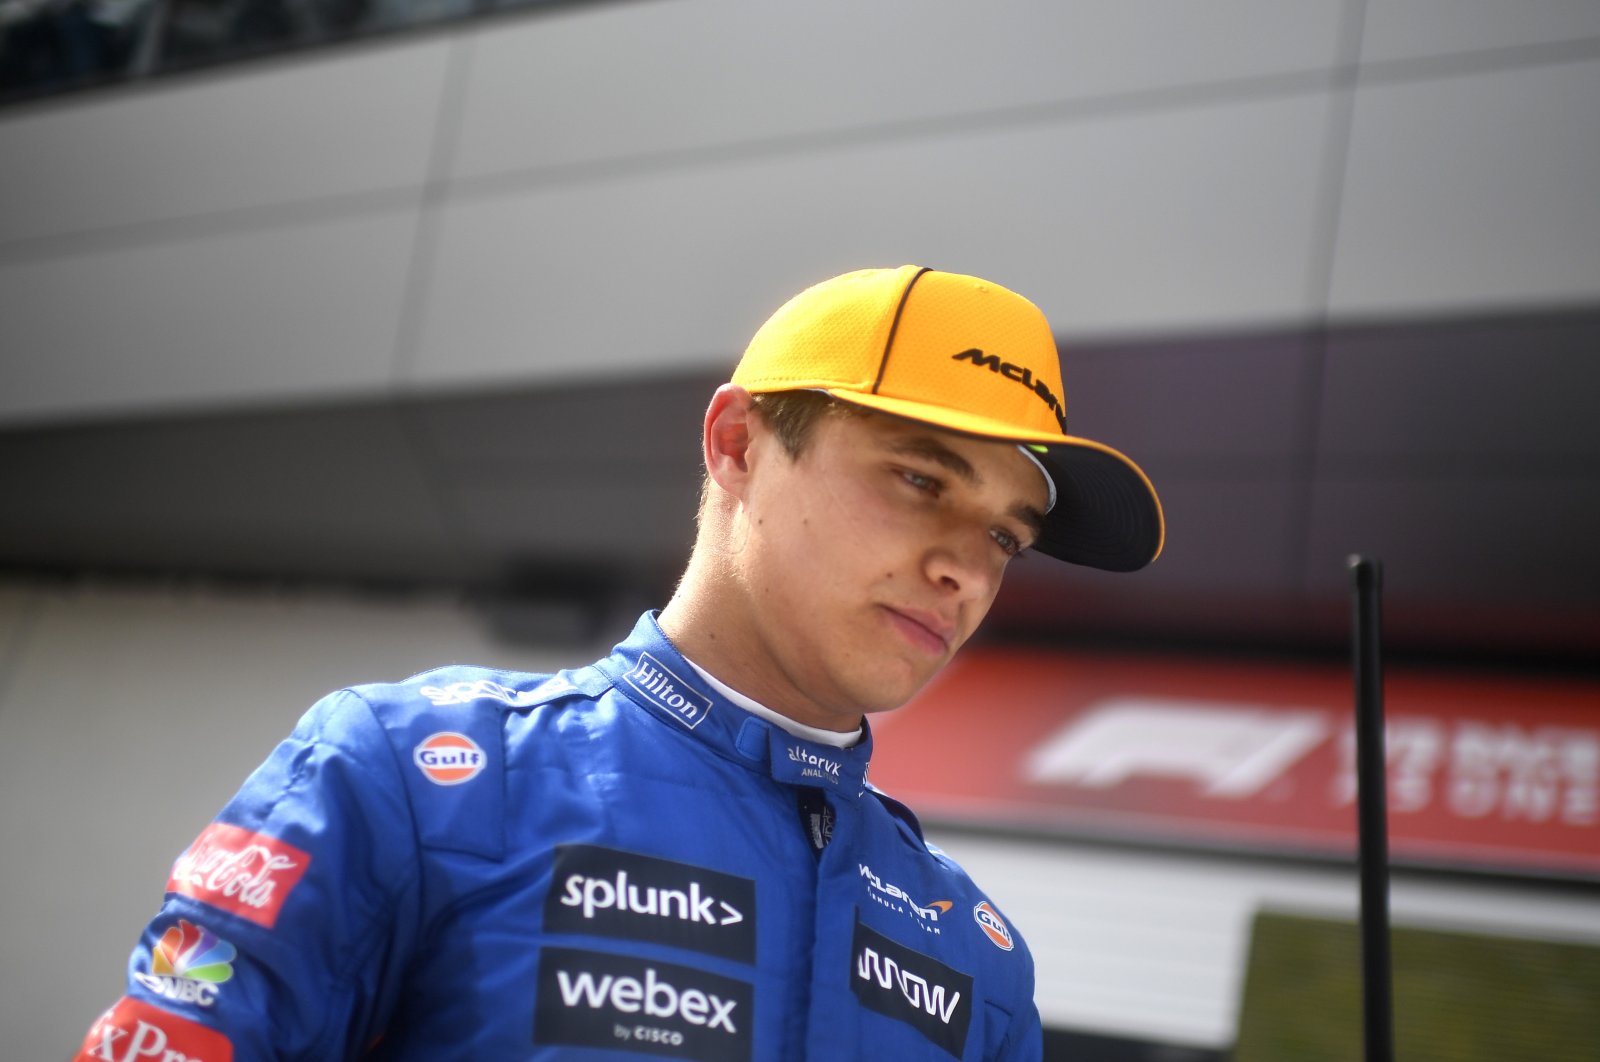 Mclaren British driver Lando Norris after taking third place in the Austrian Formula One Grand Prix at the Red Bull Ring racetrack in Spielberg, Austria, July 4, 2021. (AP Photo)